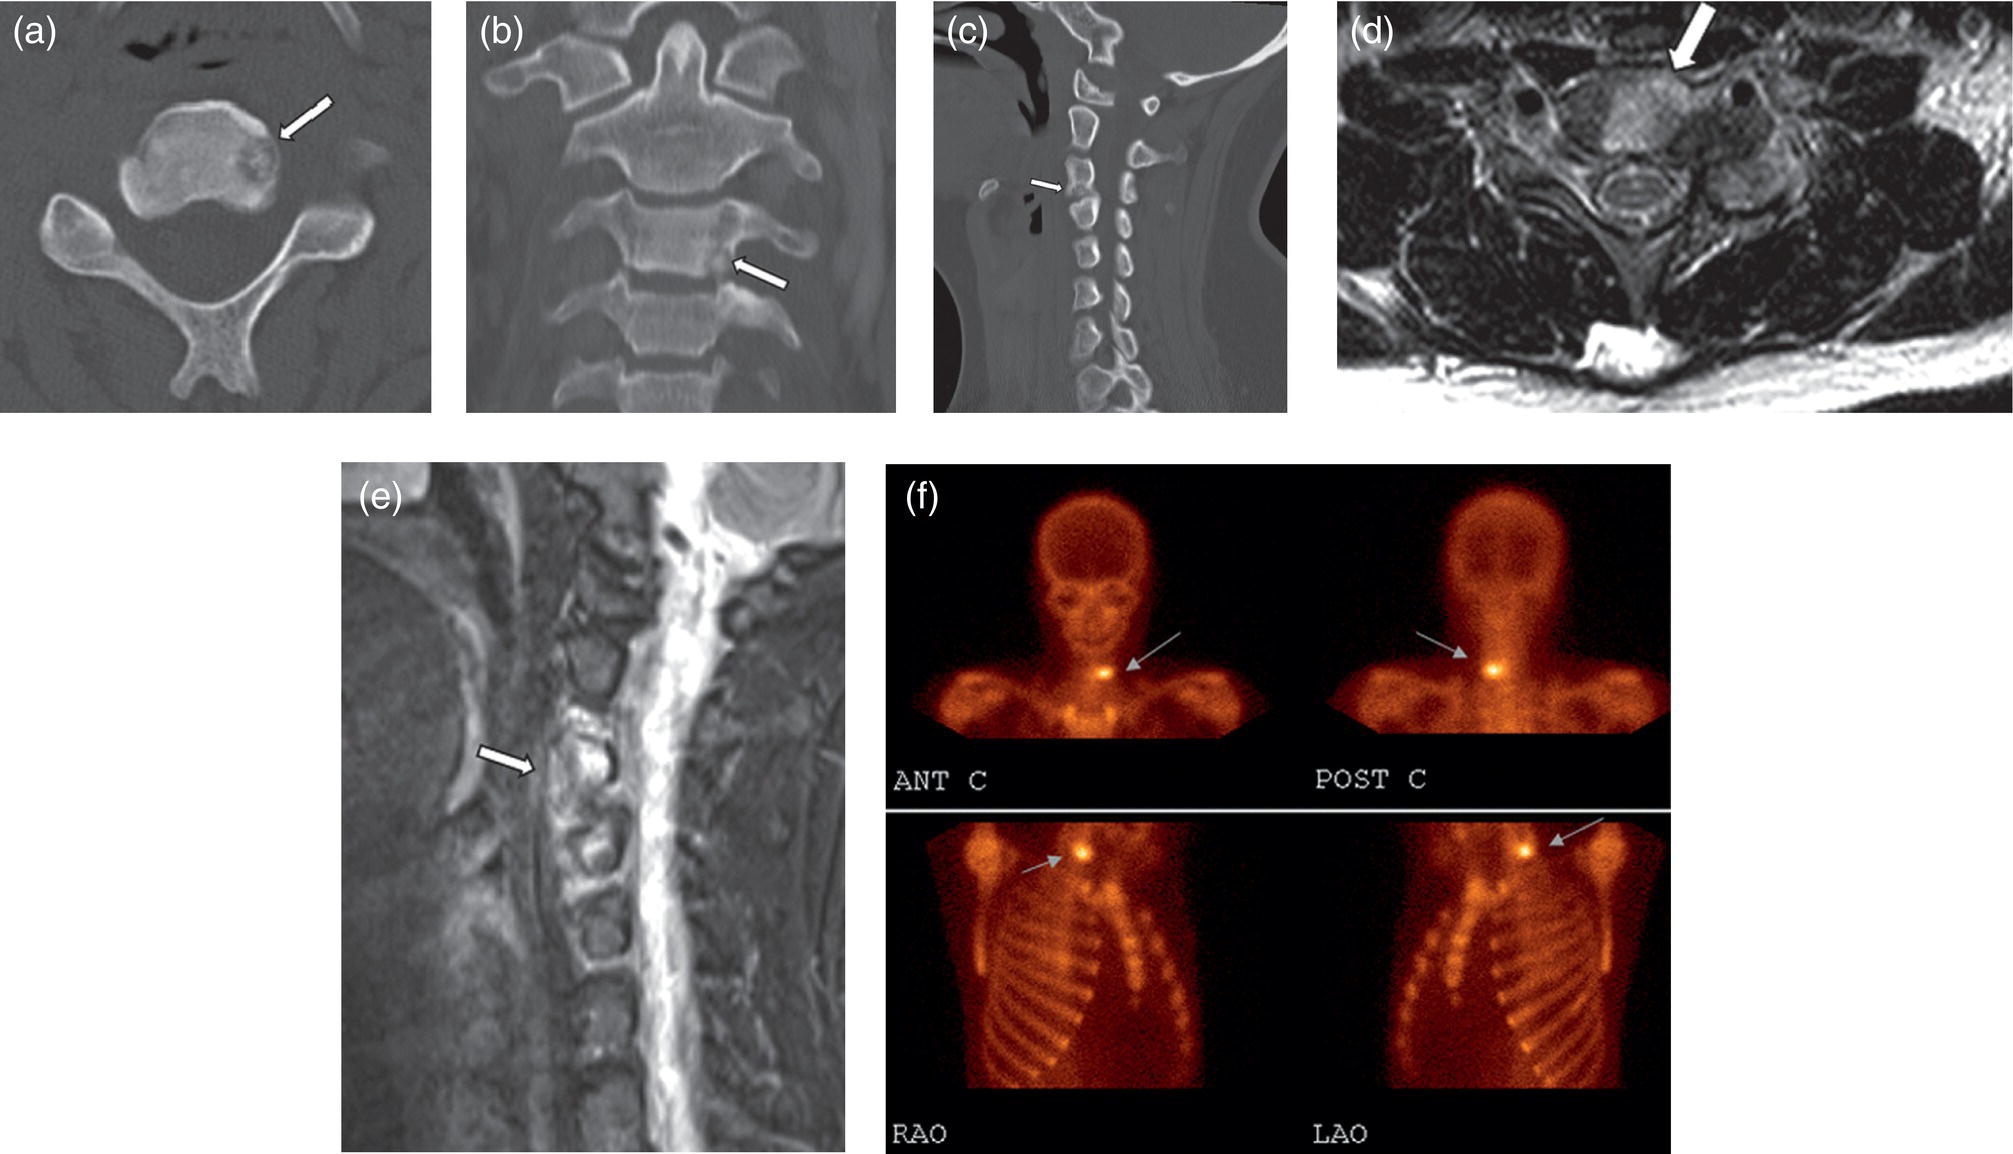 Schematic illustration of axial (A), coronal (B), and sagittal (C) CT images of an osteoid osteoma patient showing a hypodense osteolytic area in the left posterior of the third cervical vertebral body (A–C, arrows) accompanying a central nidus and sclerotic rim, typical for osteoid osteoma.